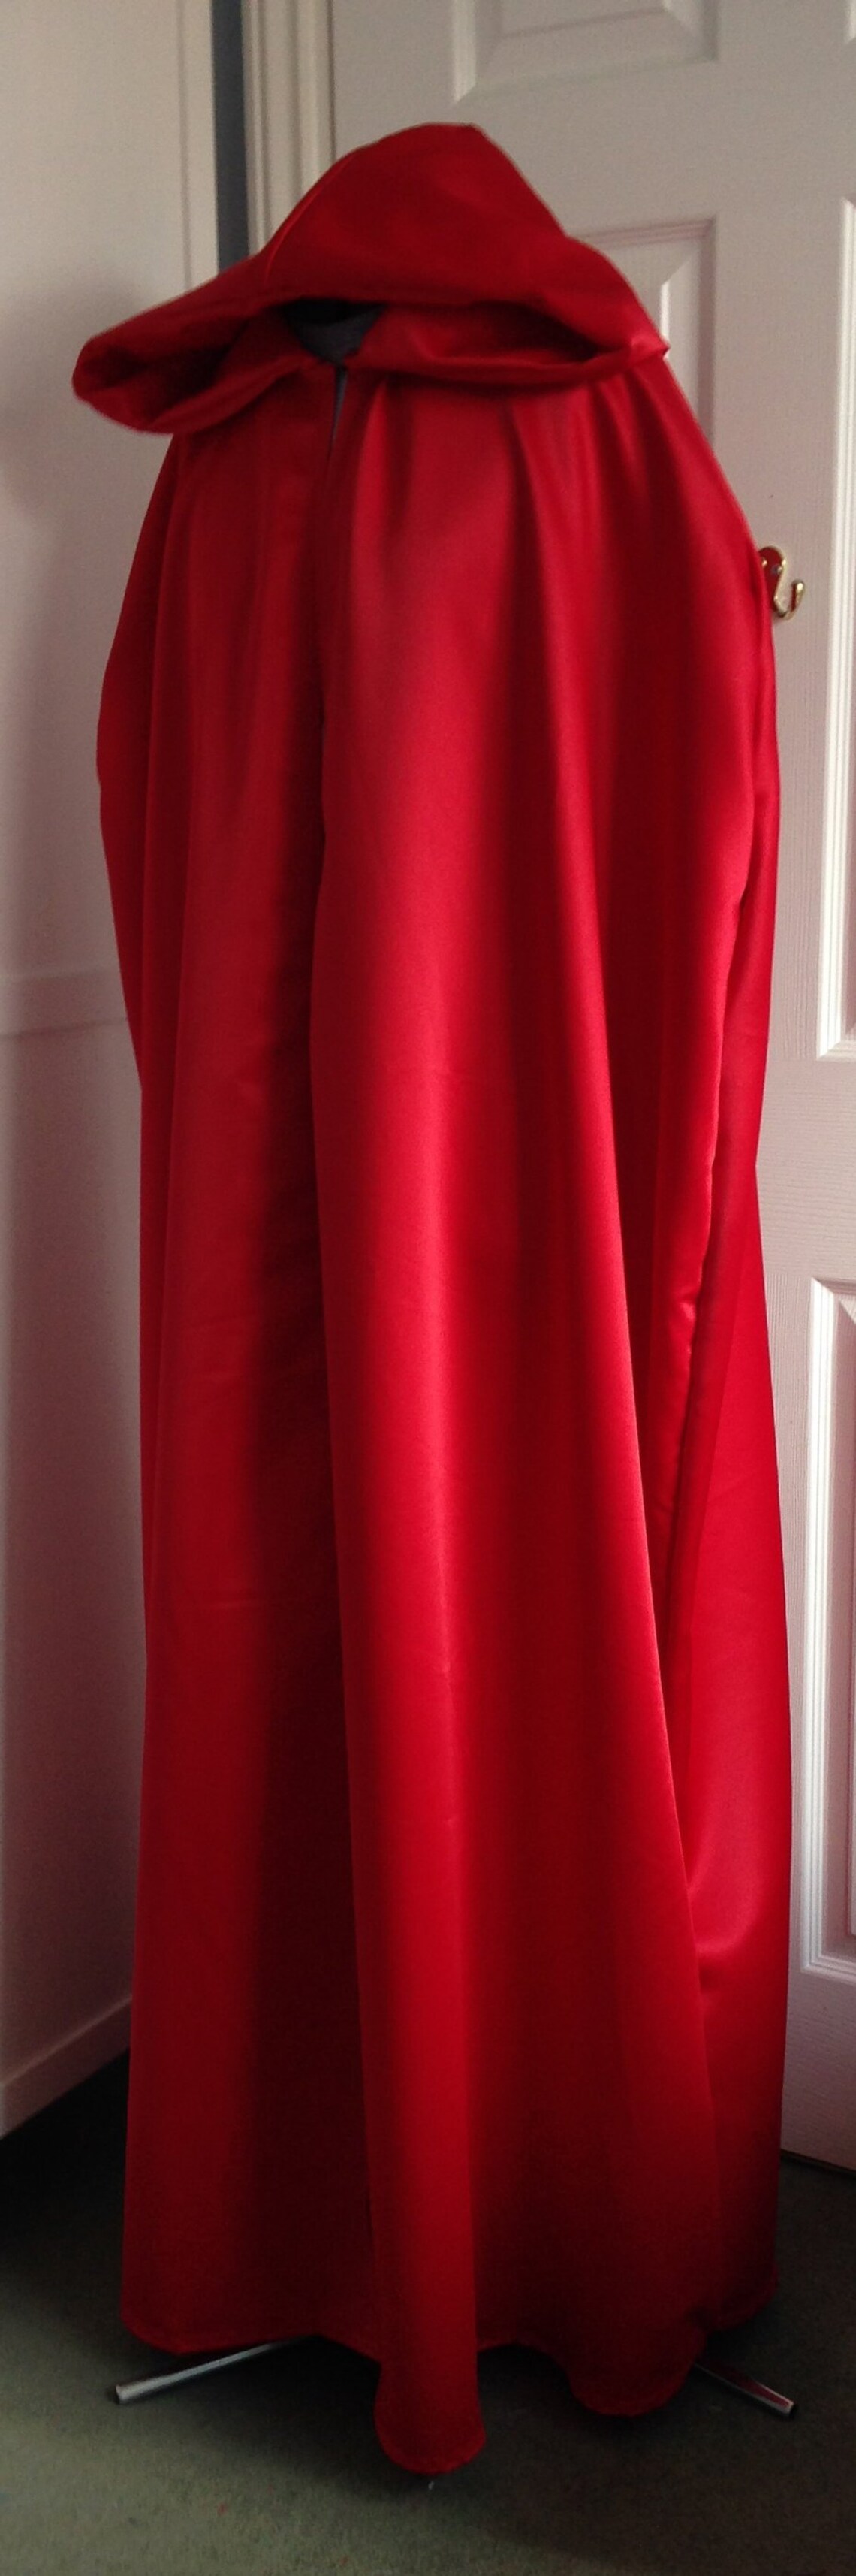 Scarlet Witch inspired red Duchess satin cape cloak with cowl | Etsy